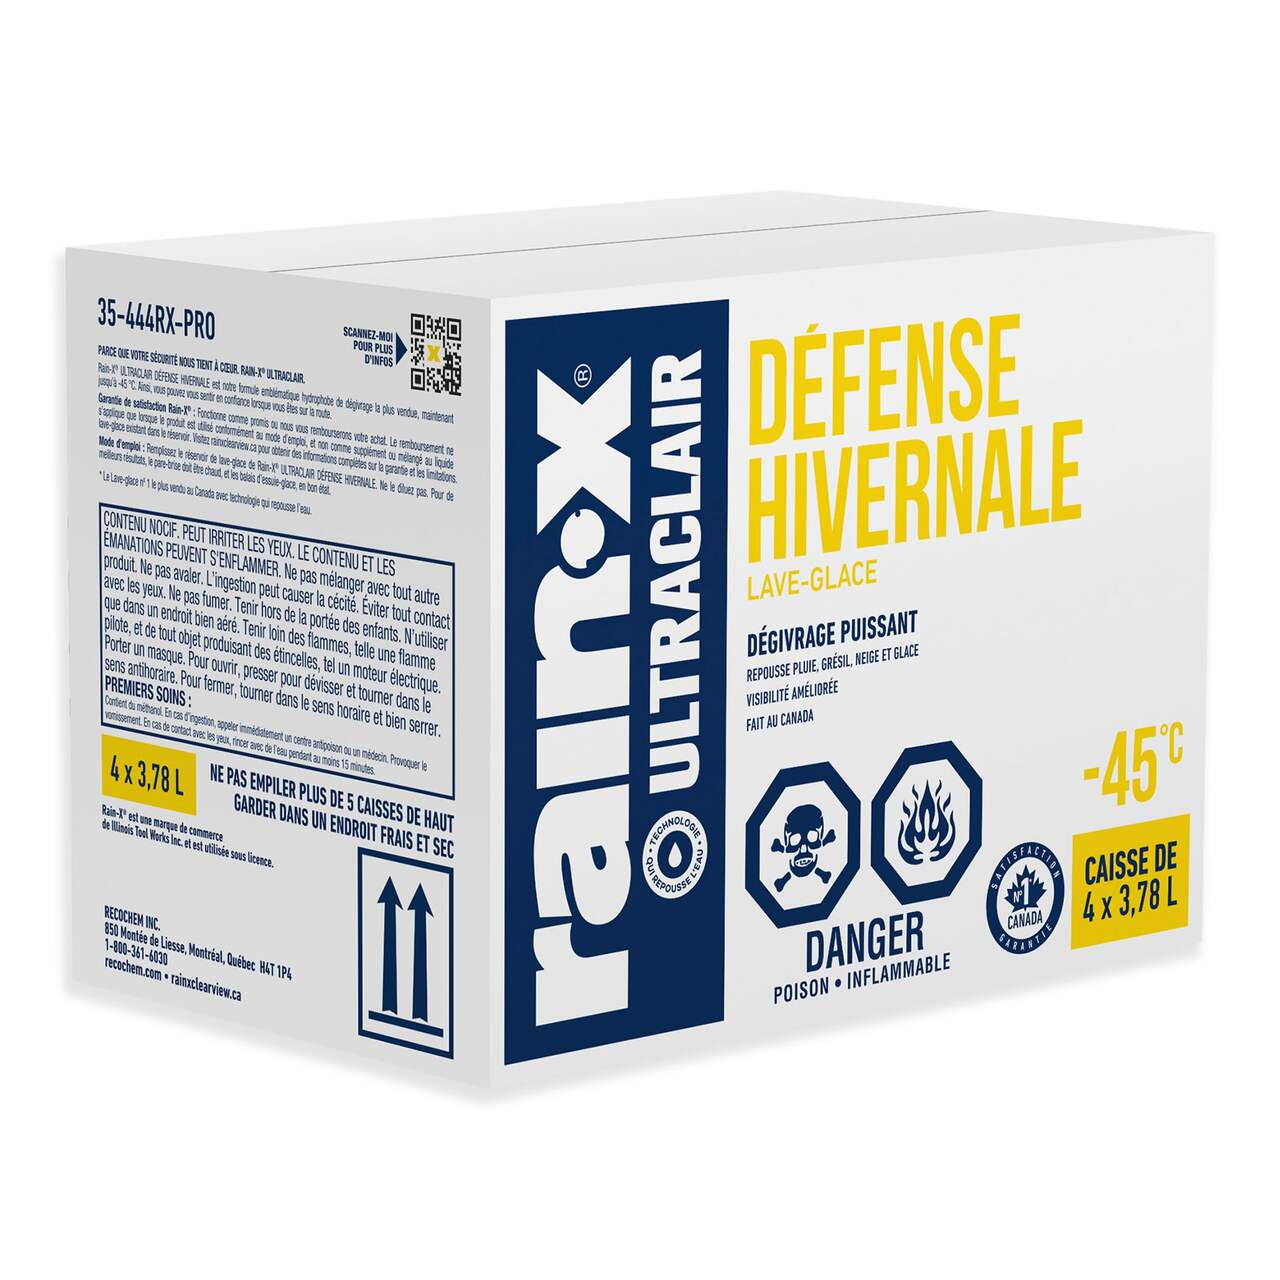 Défense hivernale - Windshield Washer Fluid - Rain-X Clearview